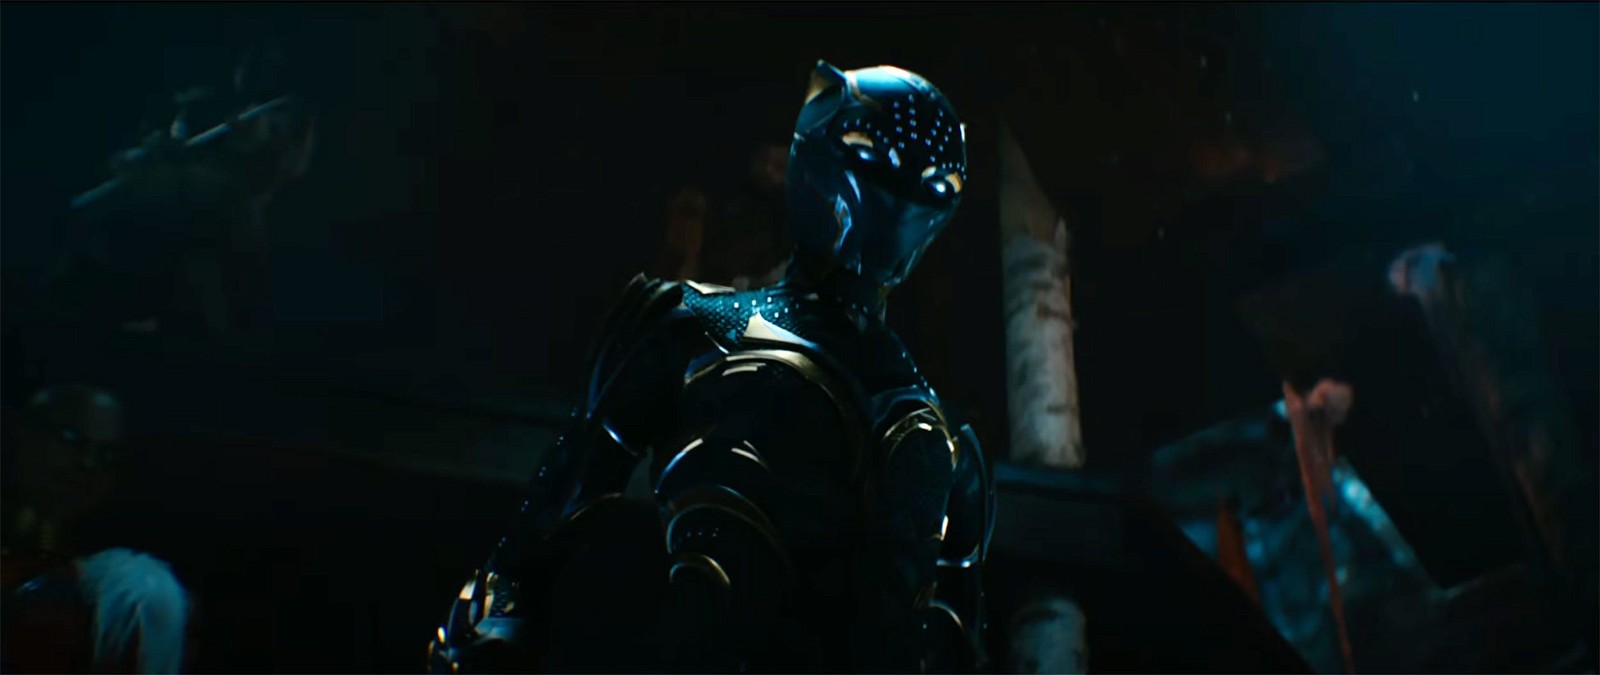 The final Black Panther suit makes a grand reveal topped off in the official trailer